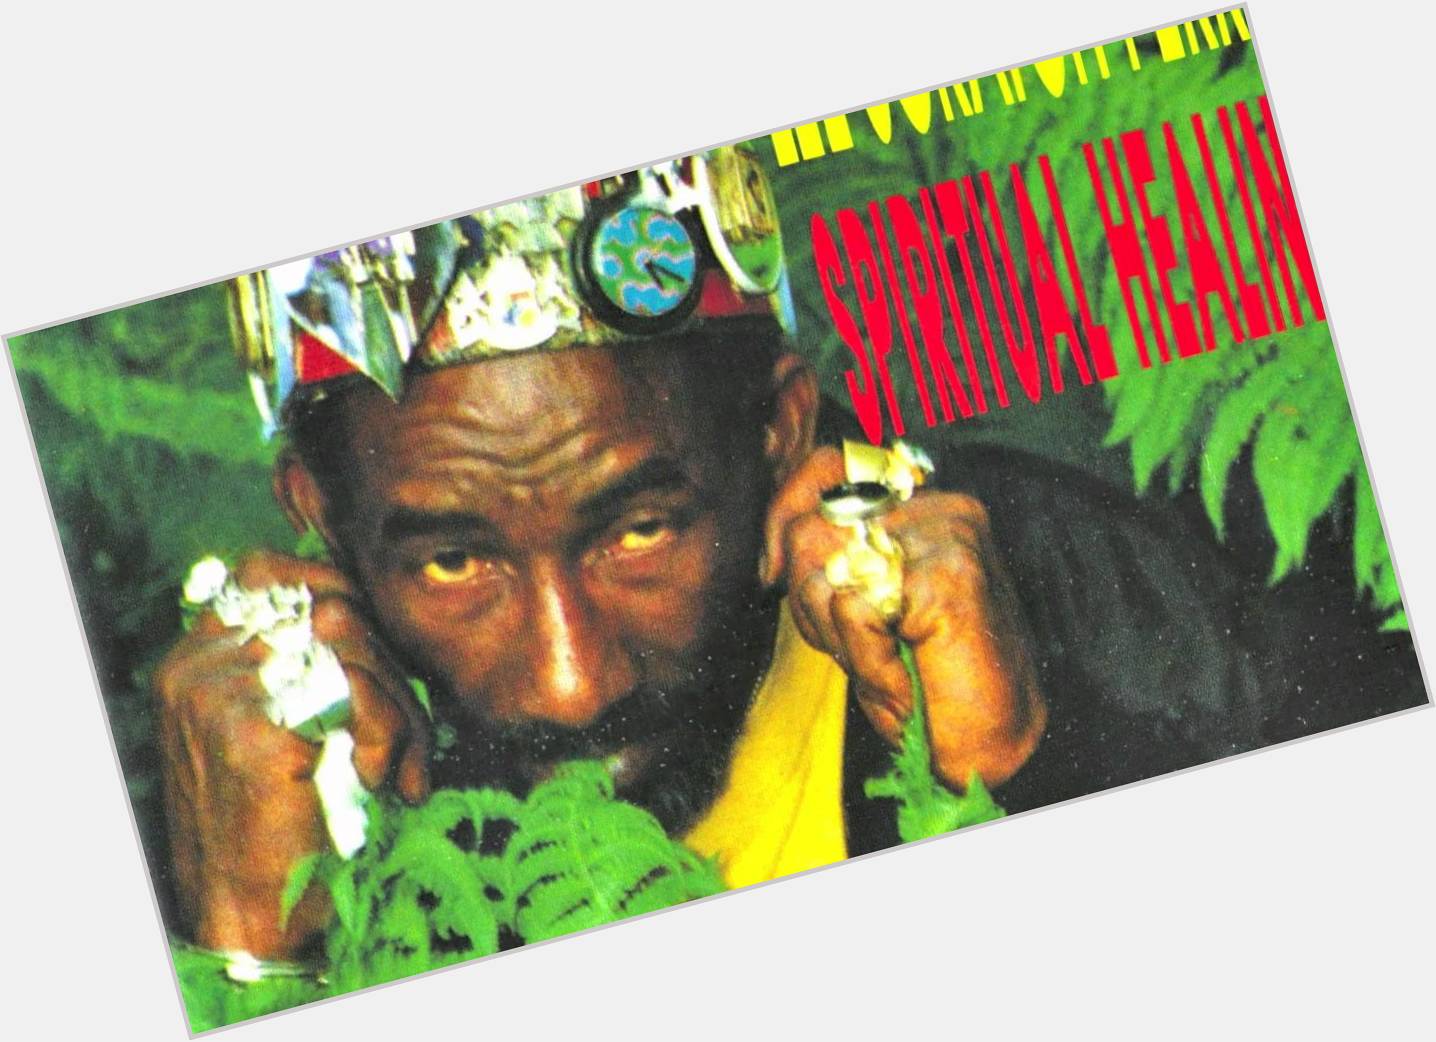 Http://fanpagepress.net/m/L/Lee Scratch Perry Sexy 3